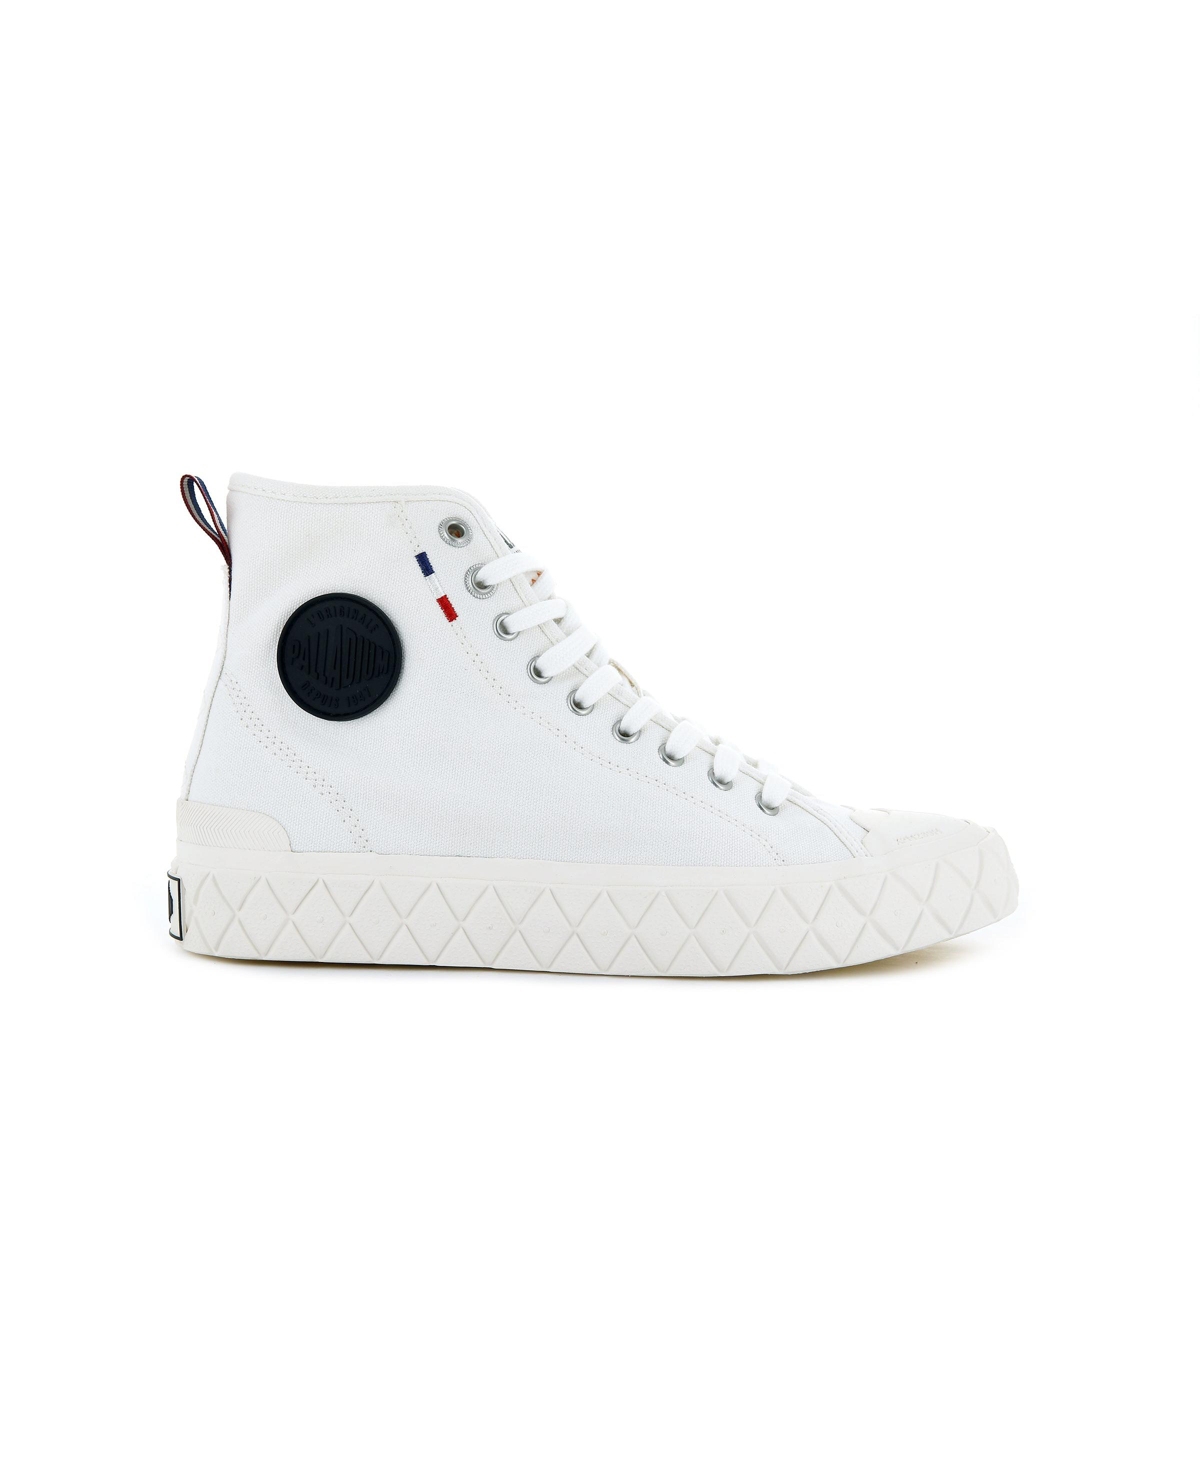 Palla Ace Canvas Mid Unisex Sneakers - Star white